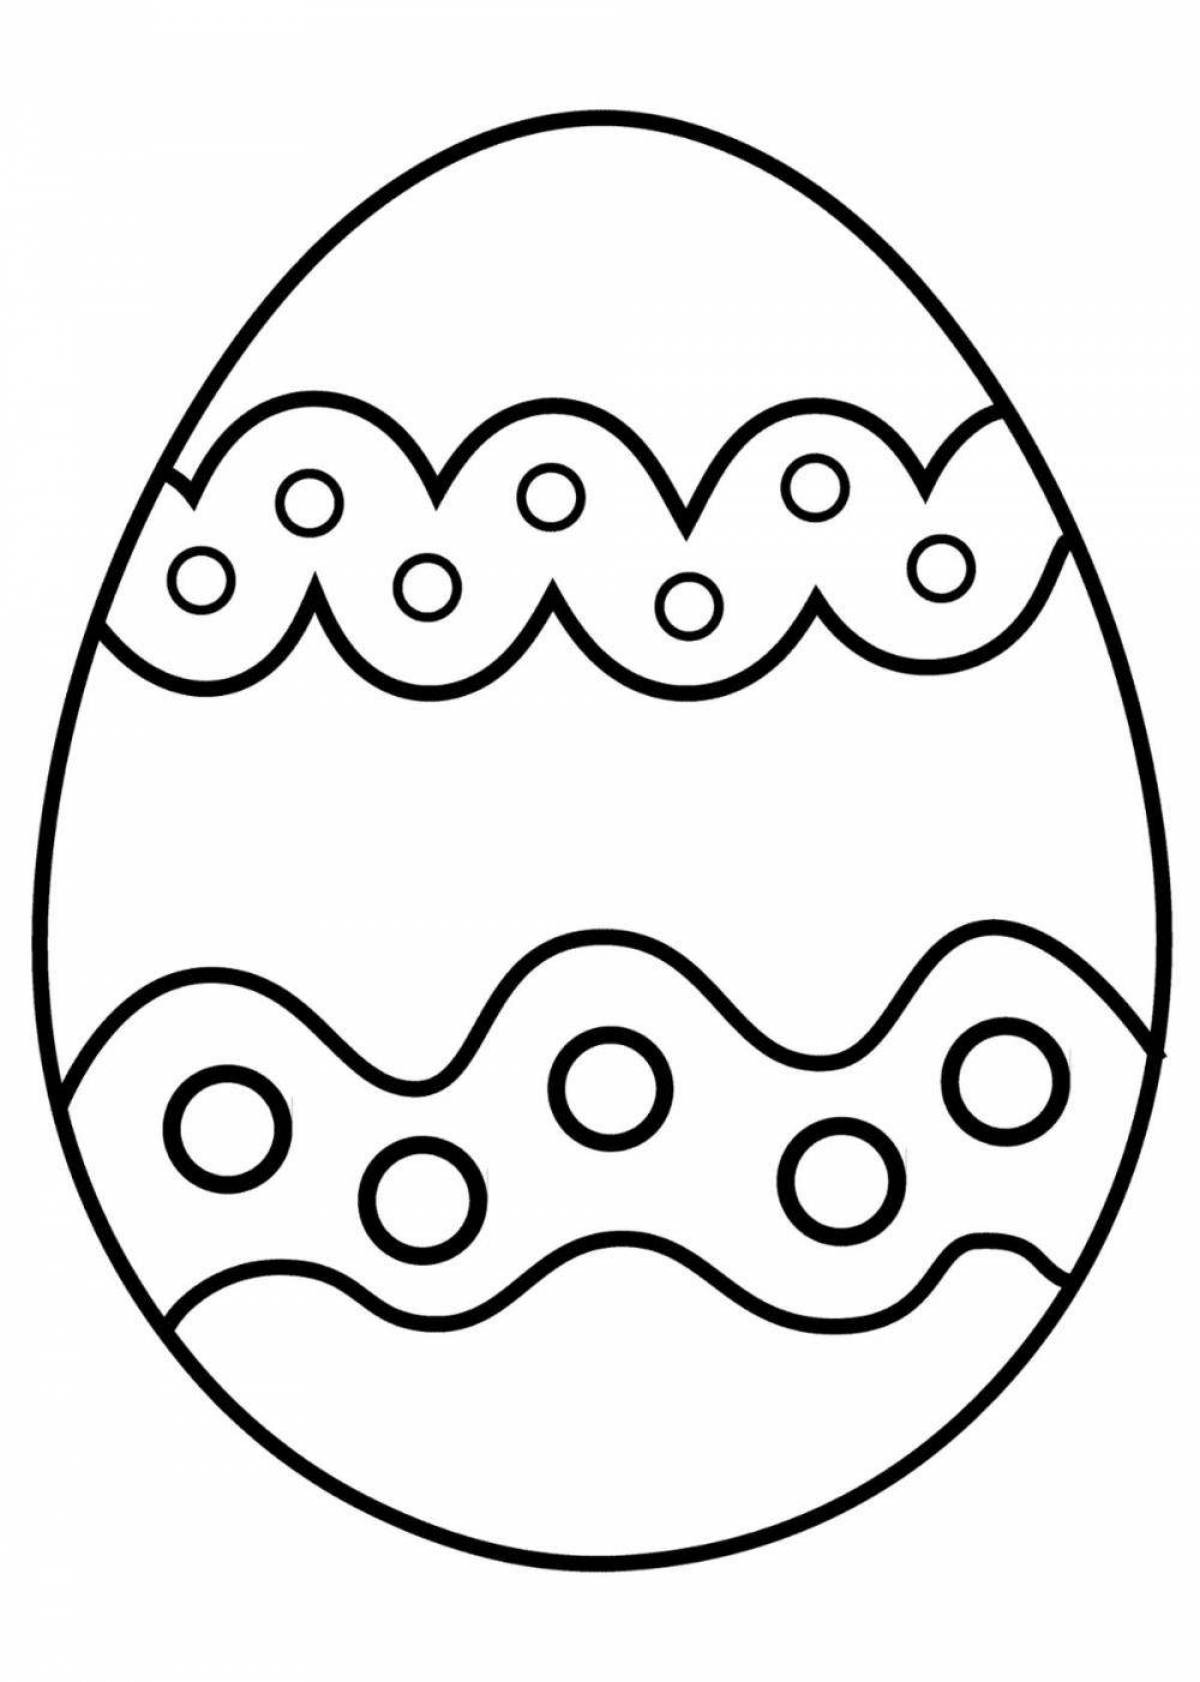 Amazing golden egg coloring page